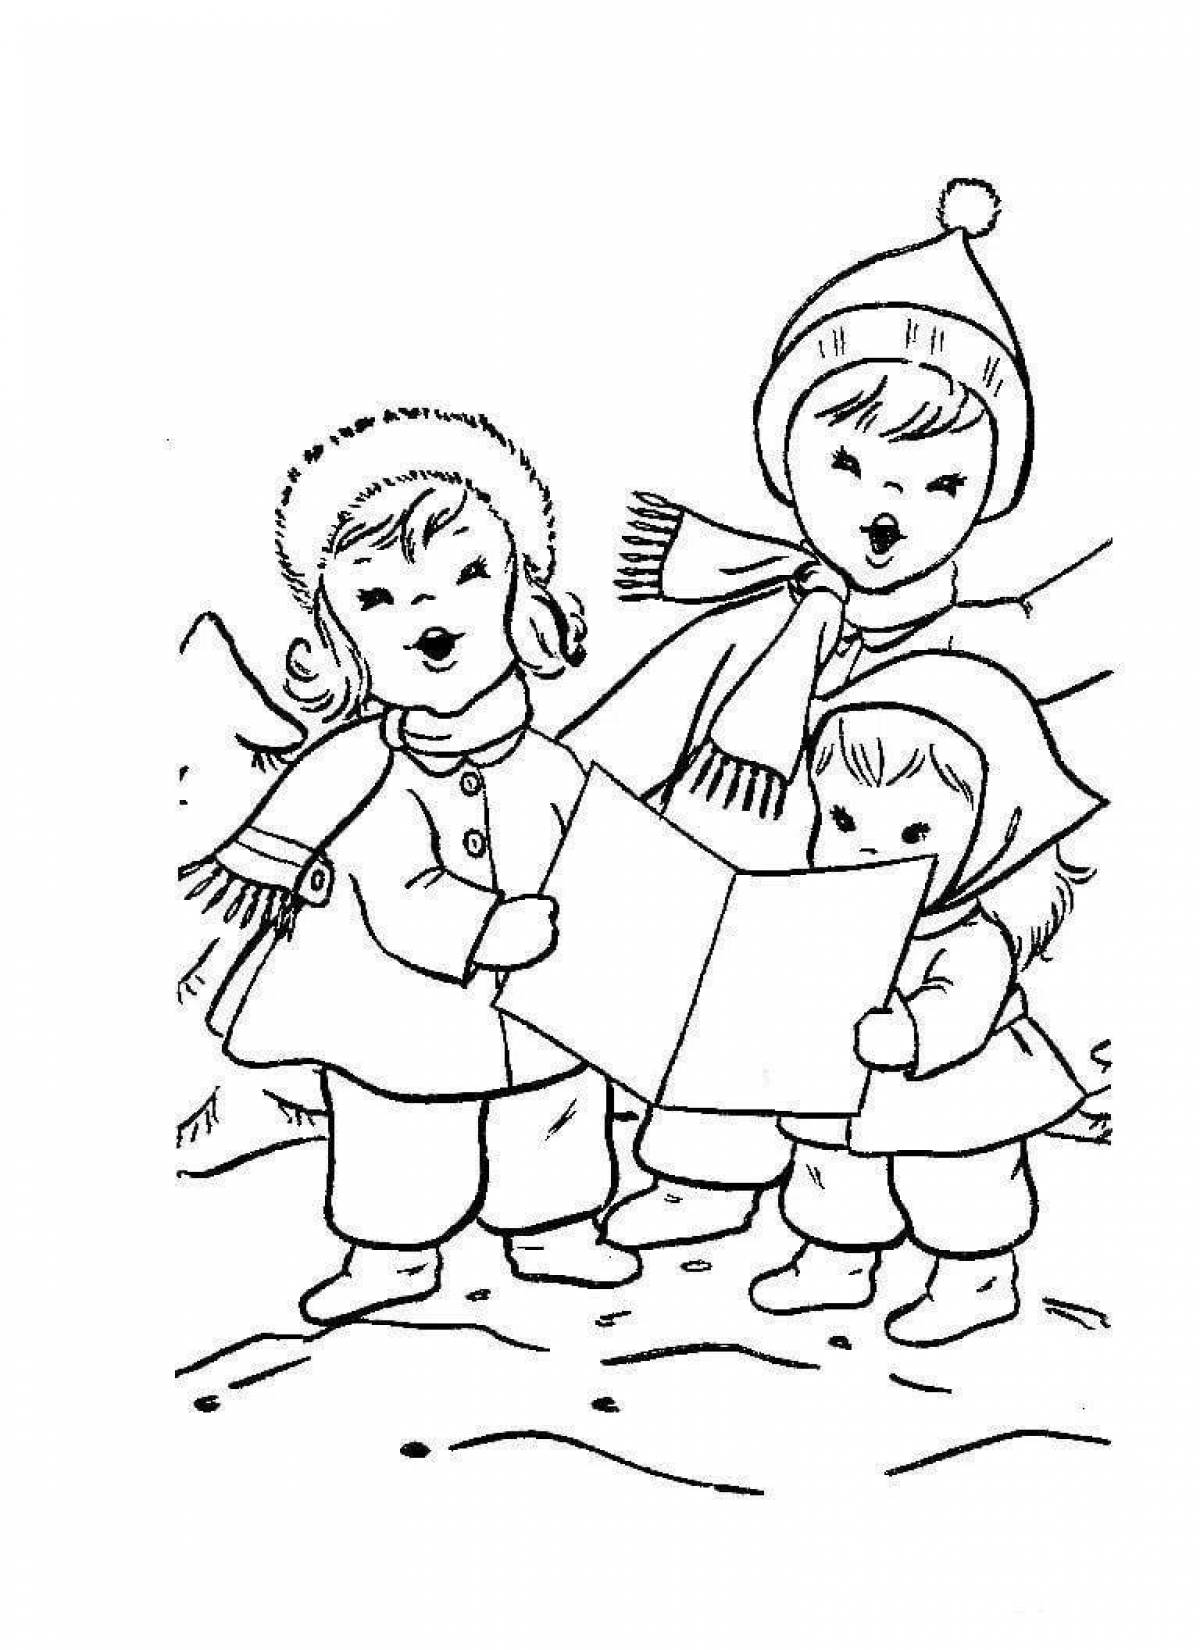 Carol's playful coloring page for kids